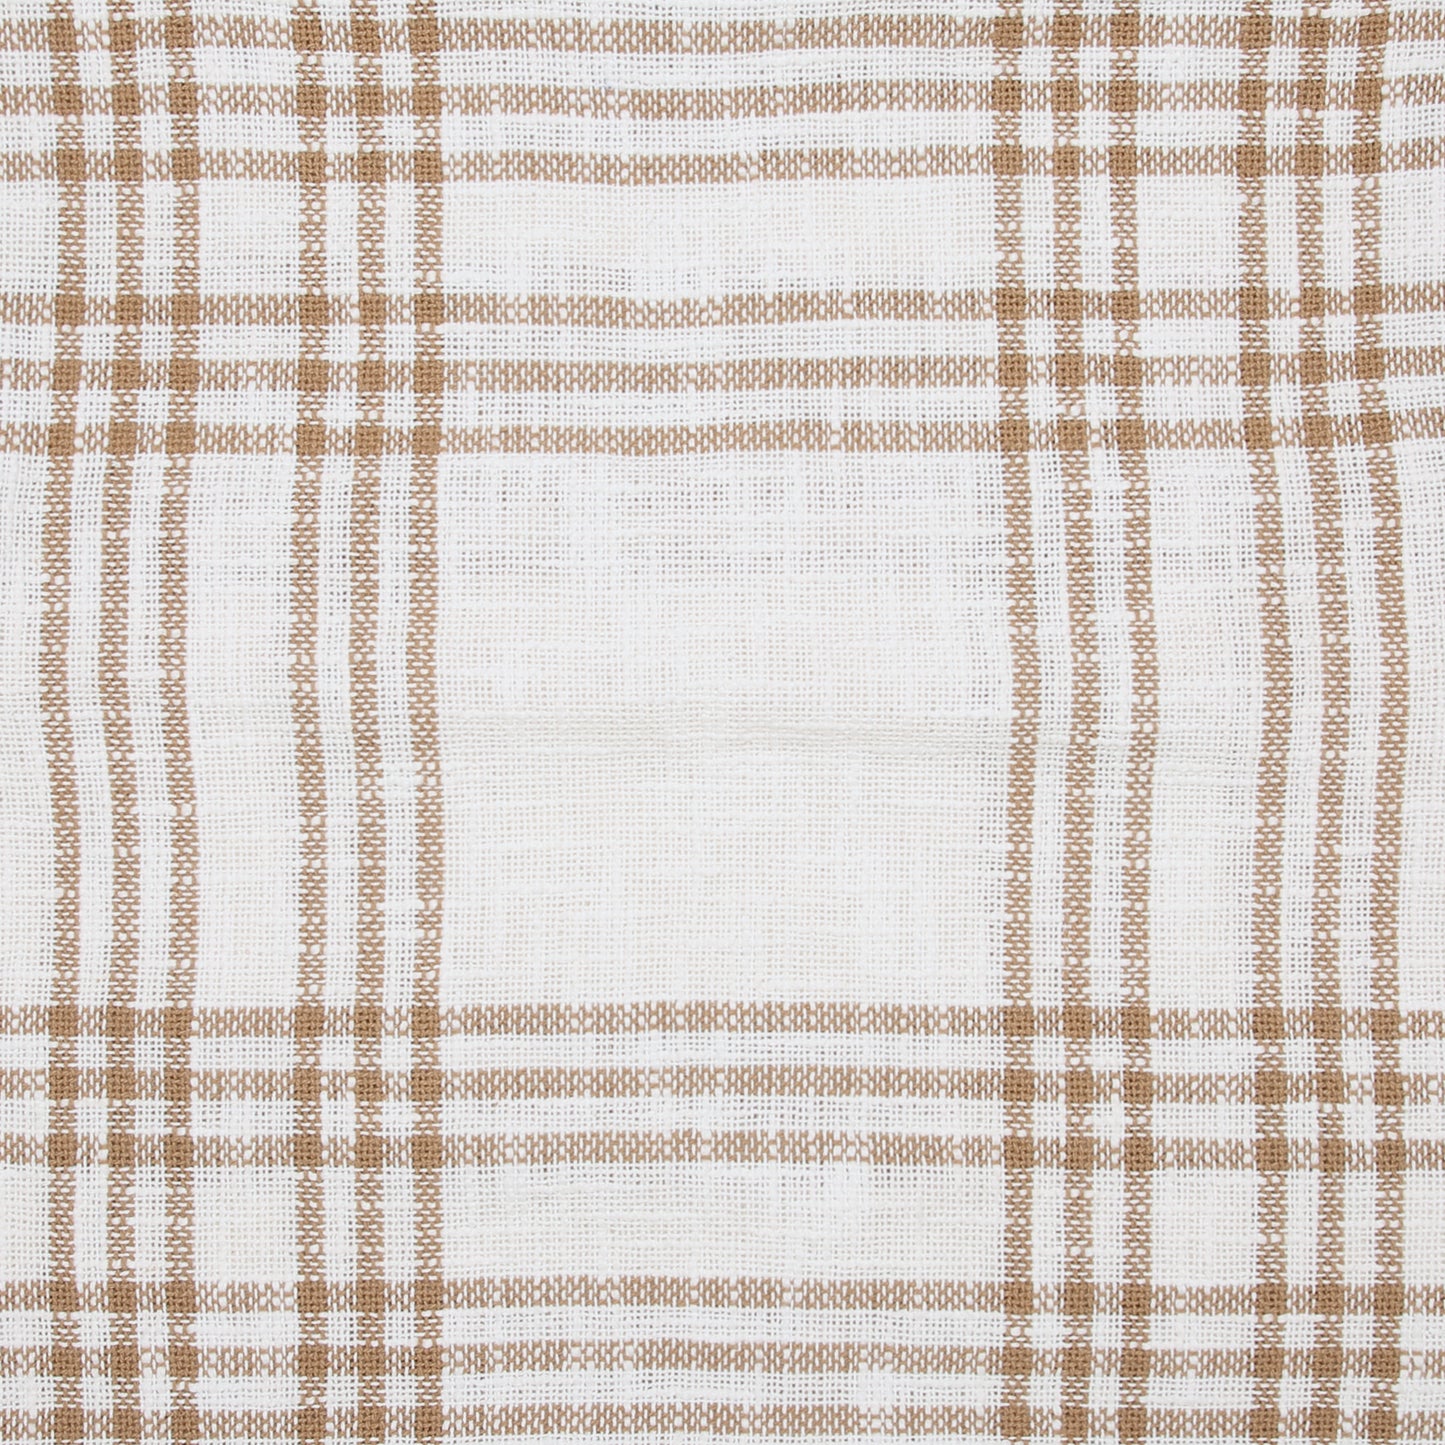 Wheat Plaid Woven Blanket Zoomed In